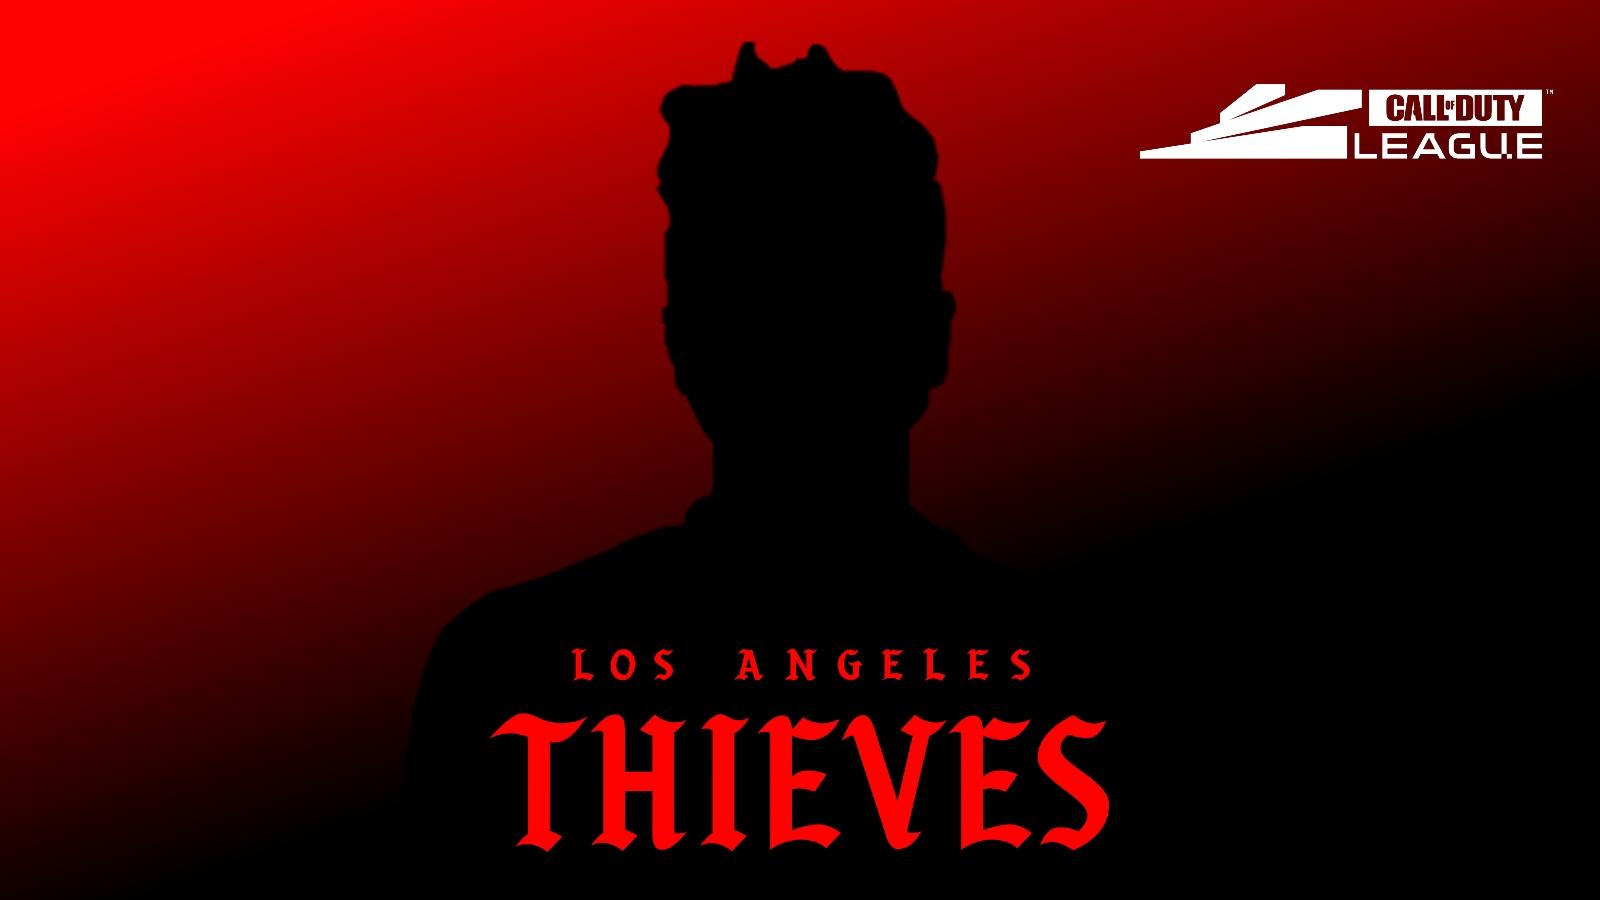 LA Thieves red and black graphic with player silhouette and Call of Duty League logo in top right corner